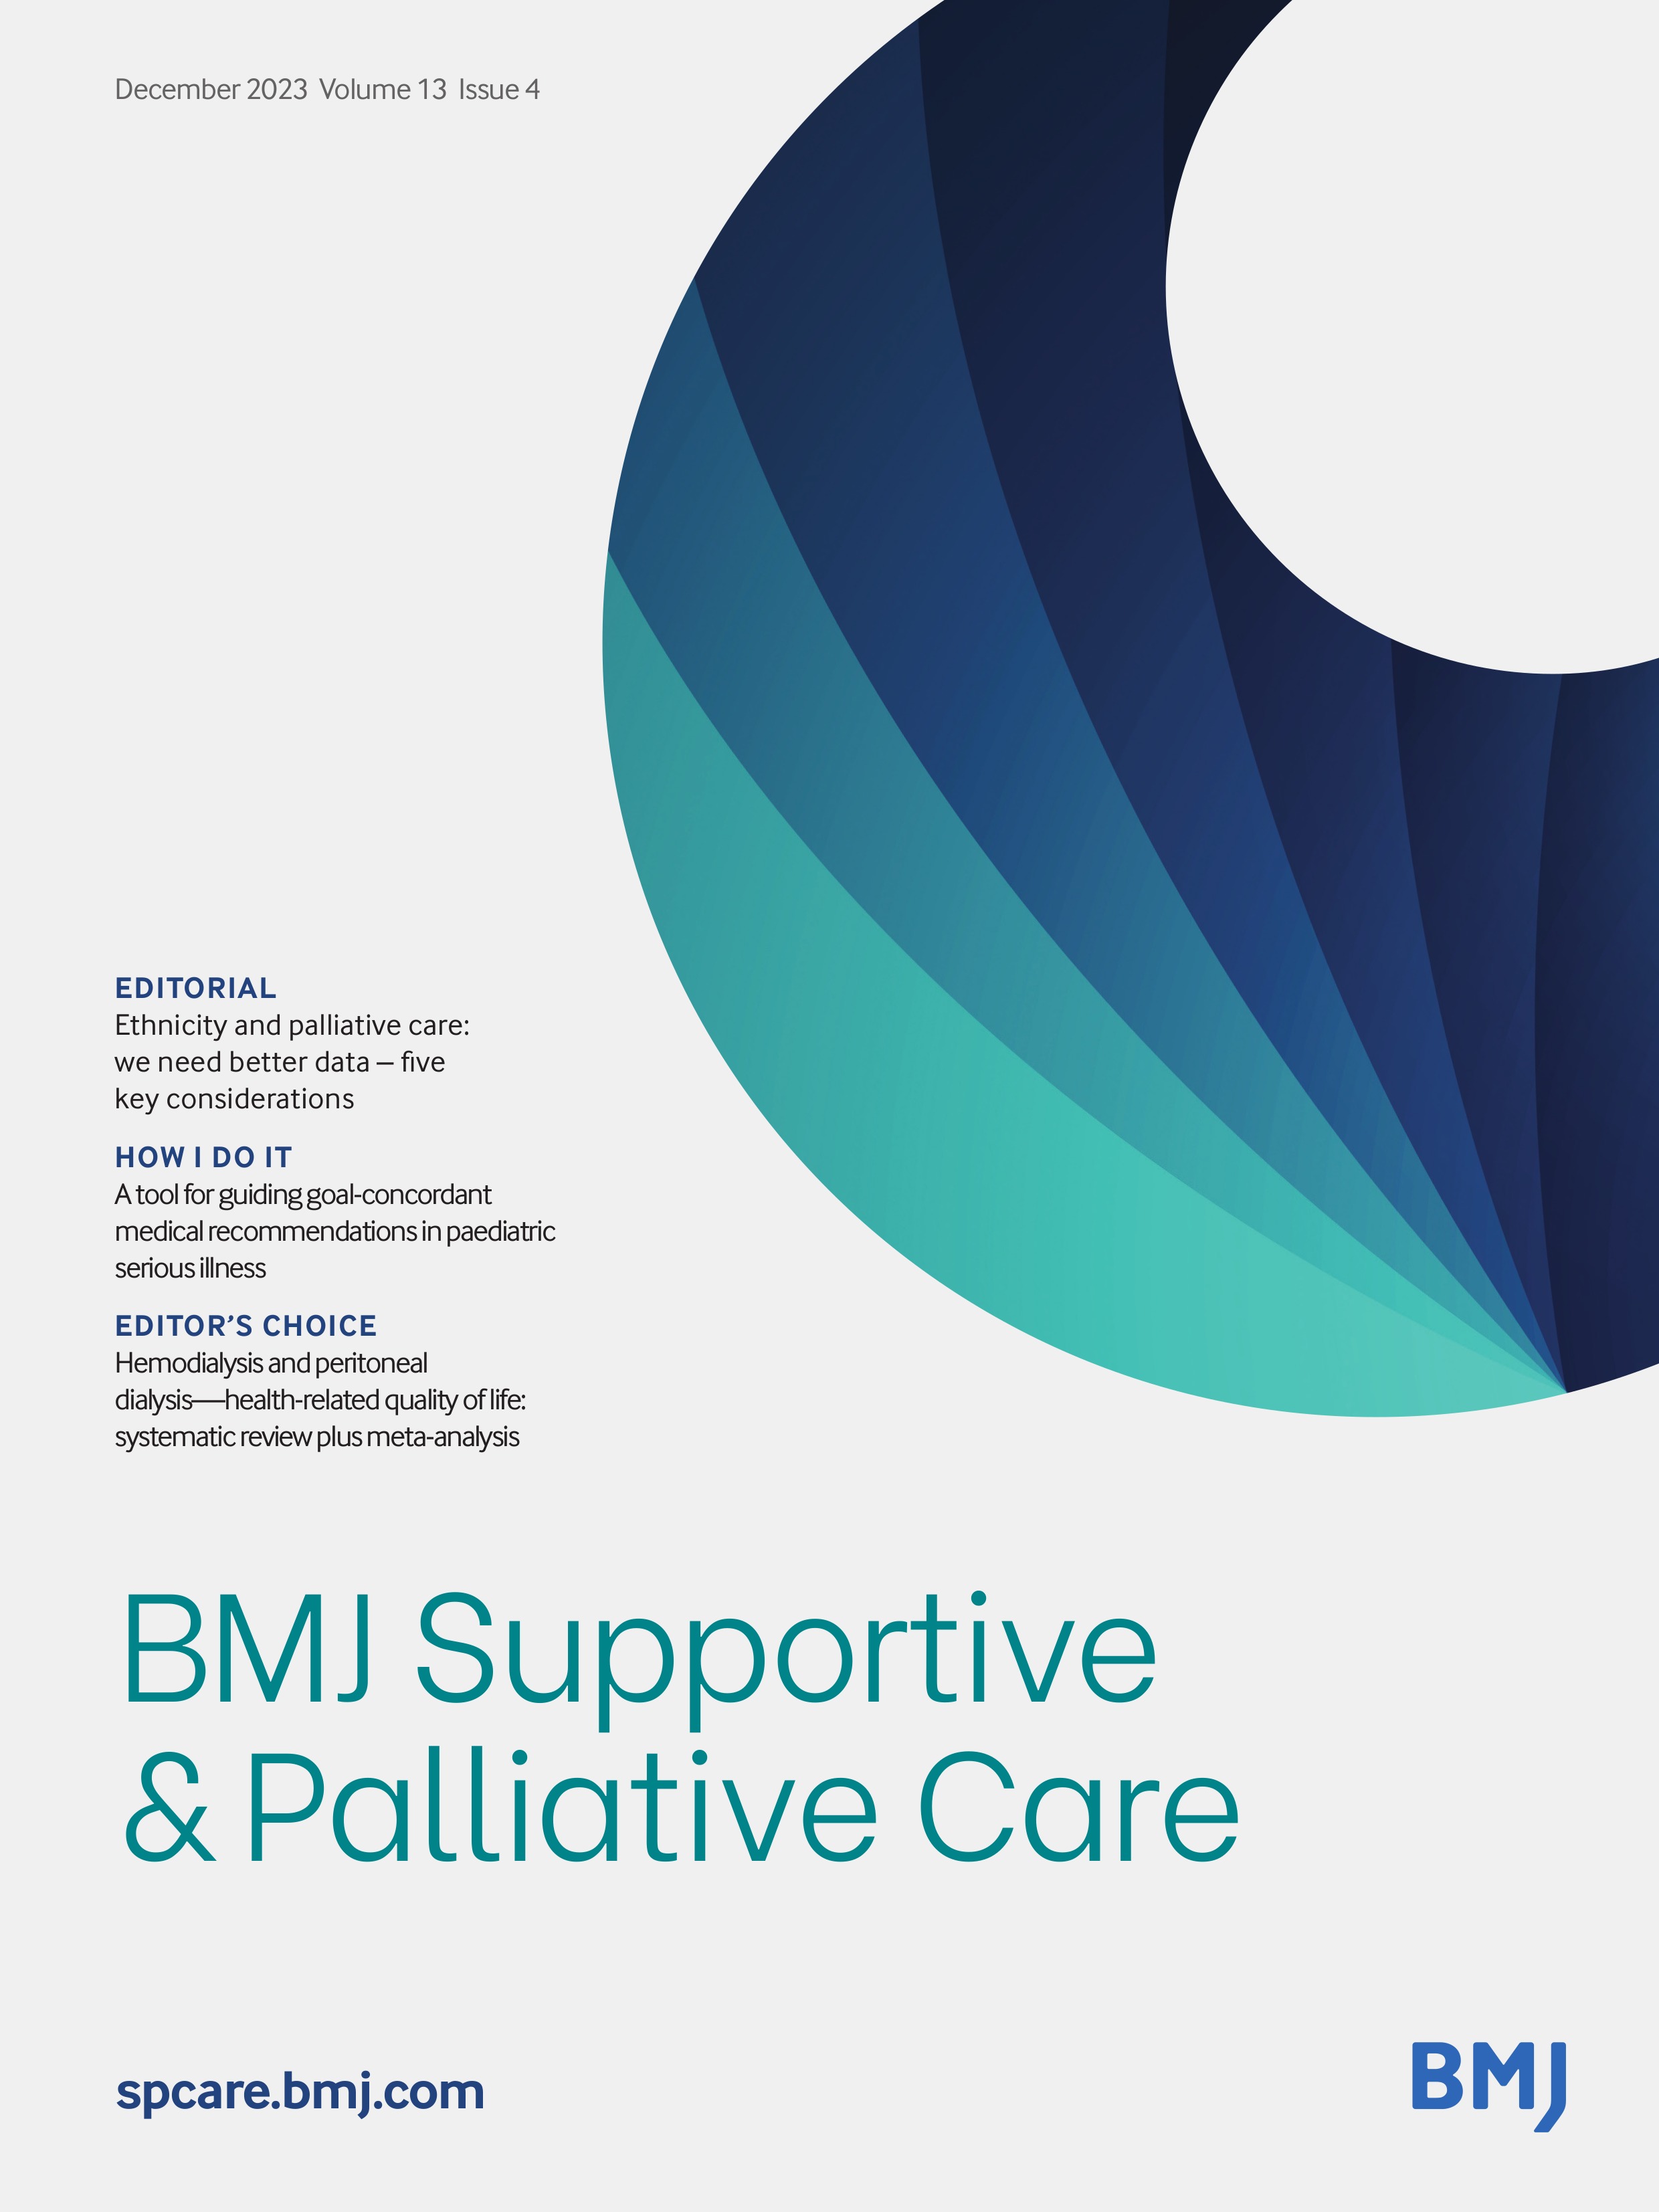 Acute palliative care units: characteristics, activities and outcomes - scoping review